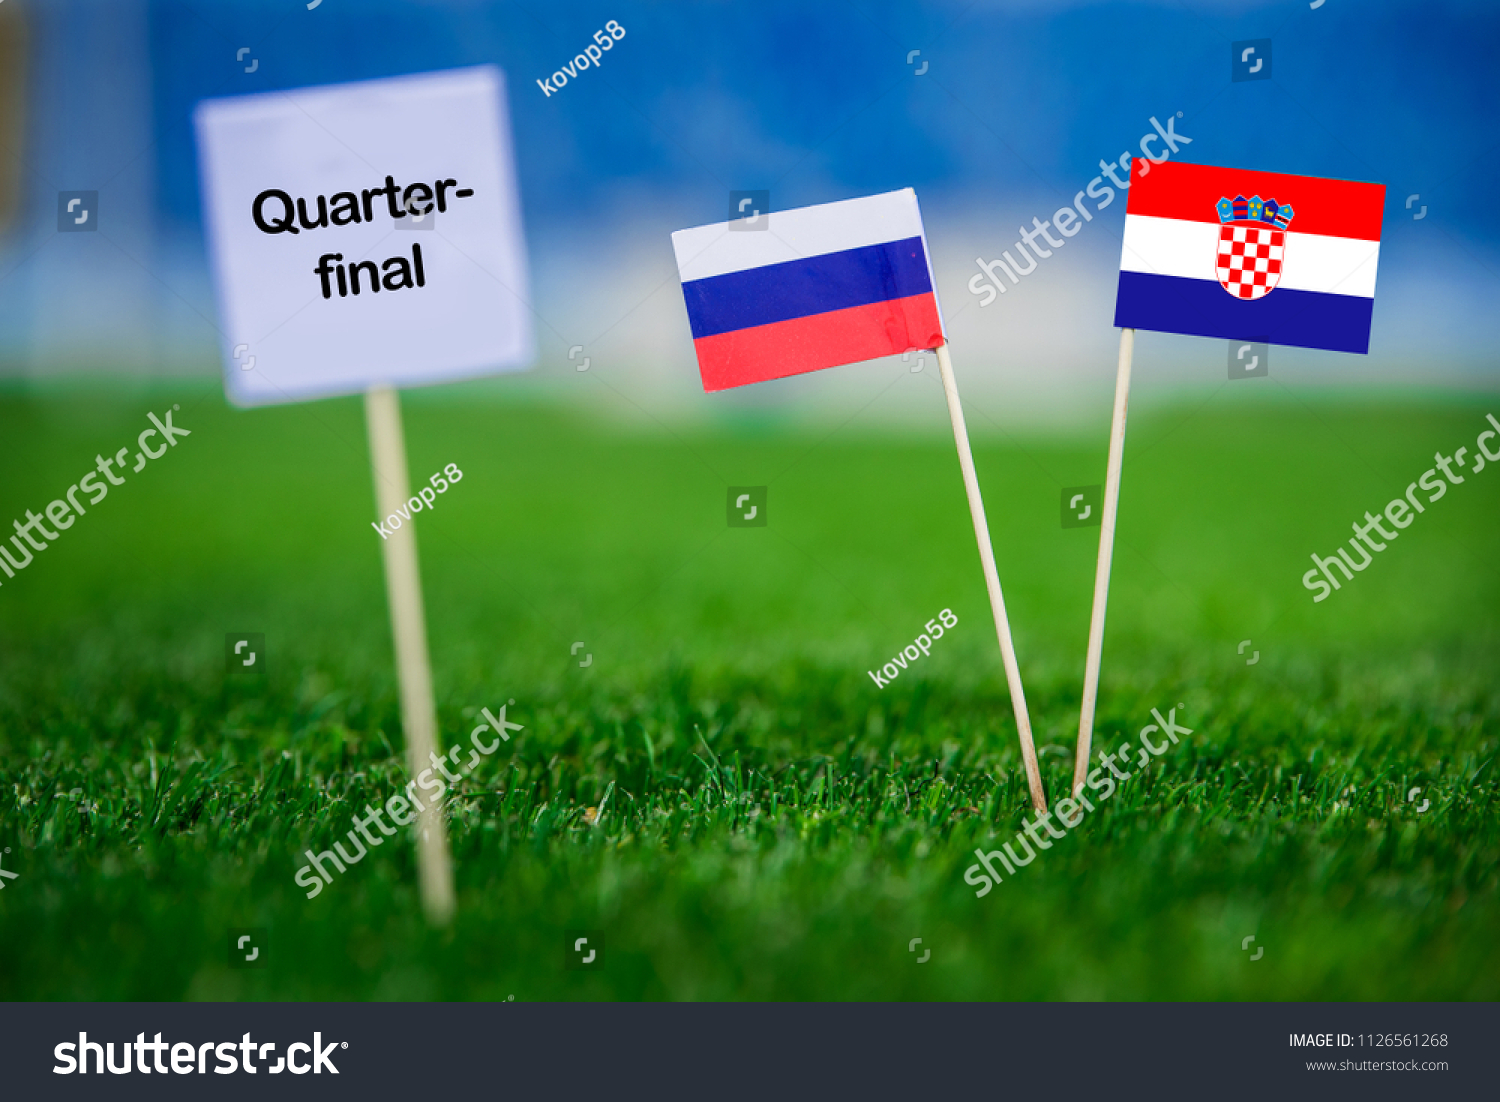 Russia and Croatia national Flag on football green grass. White table with tittle “QUARTER-FINAL” #1126561268